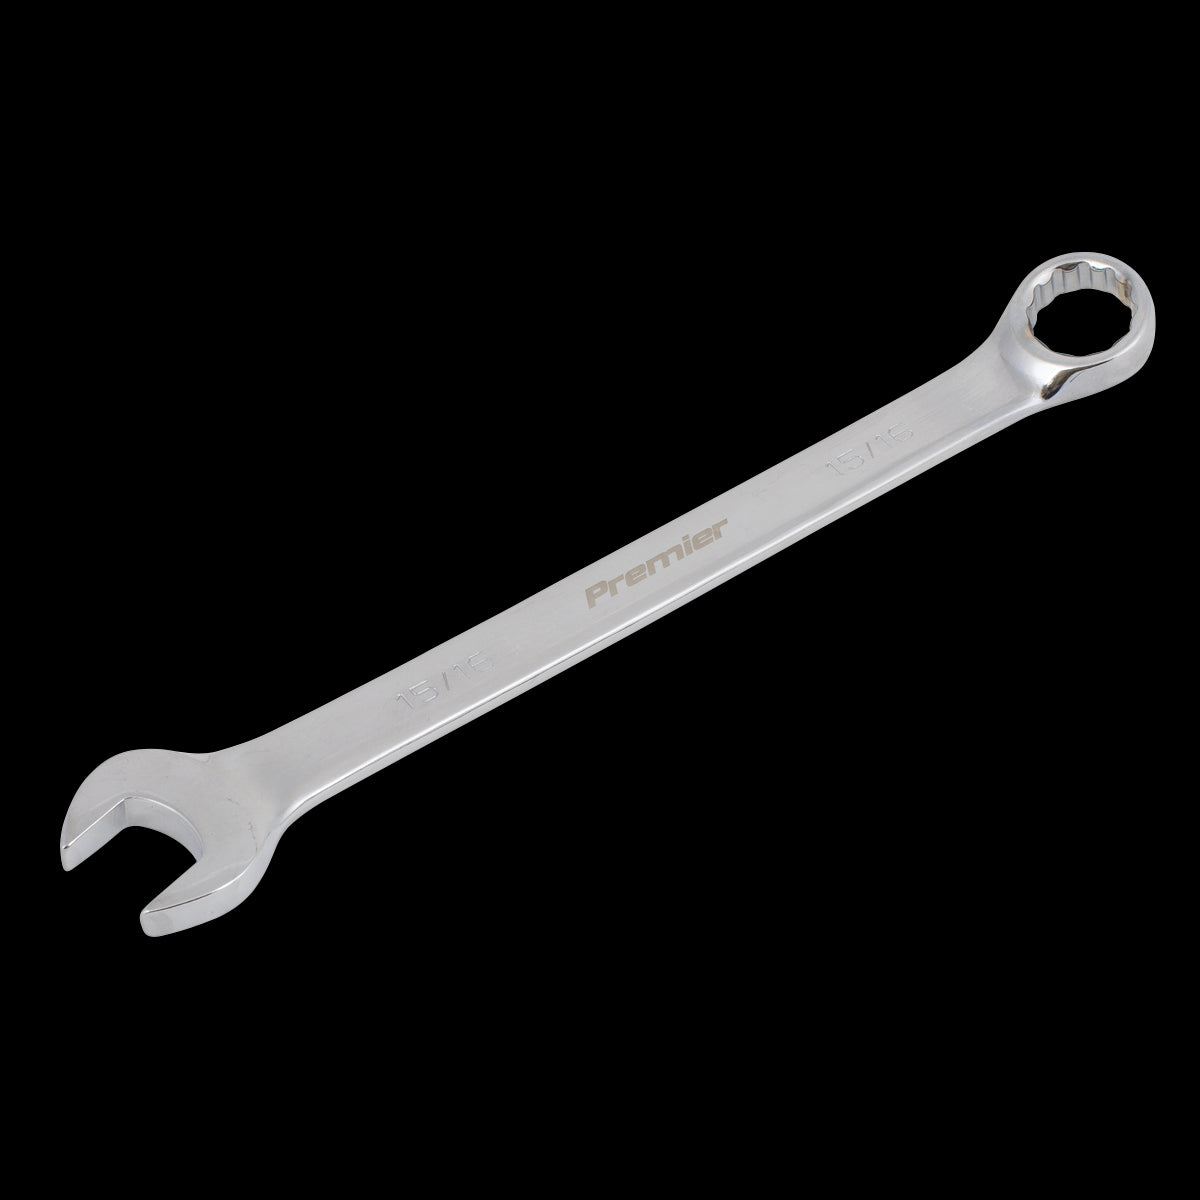 Sealey Premier Combination Spanner 15/16" - Imperial